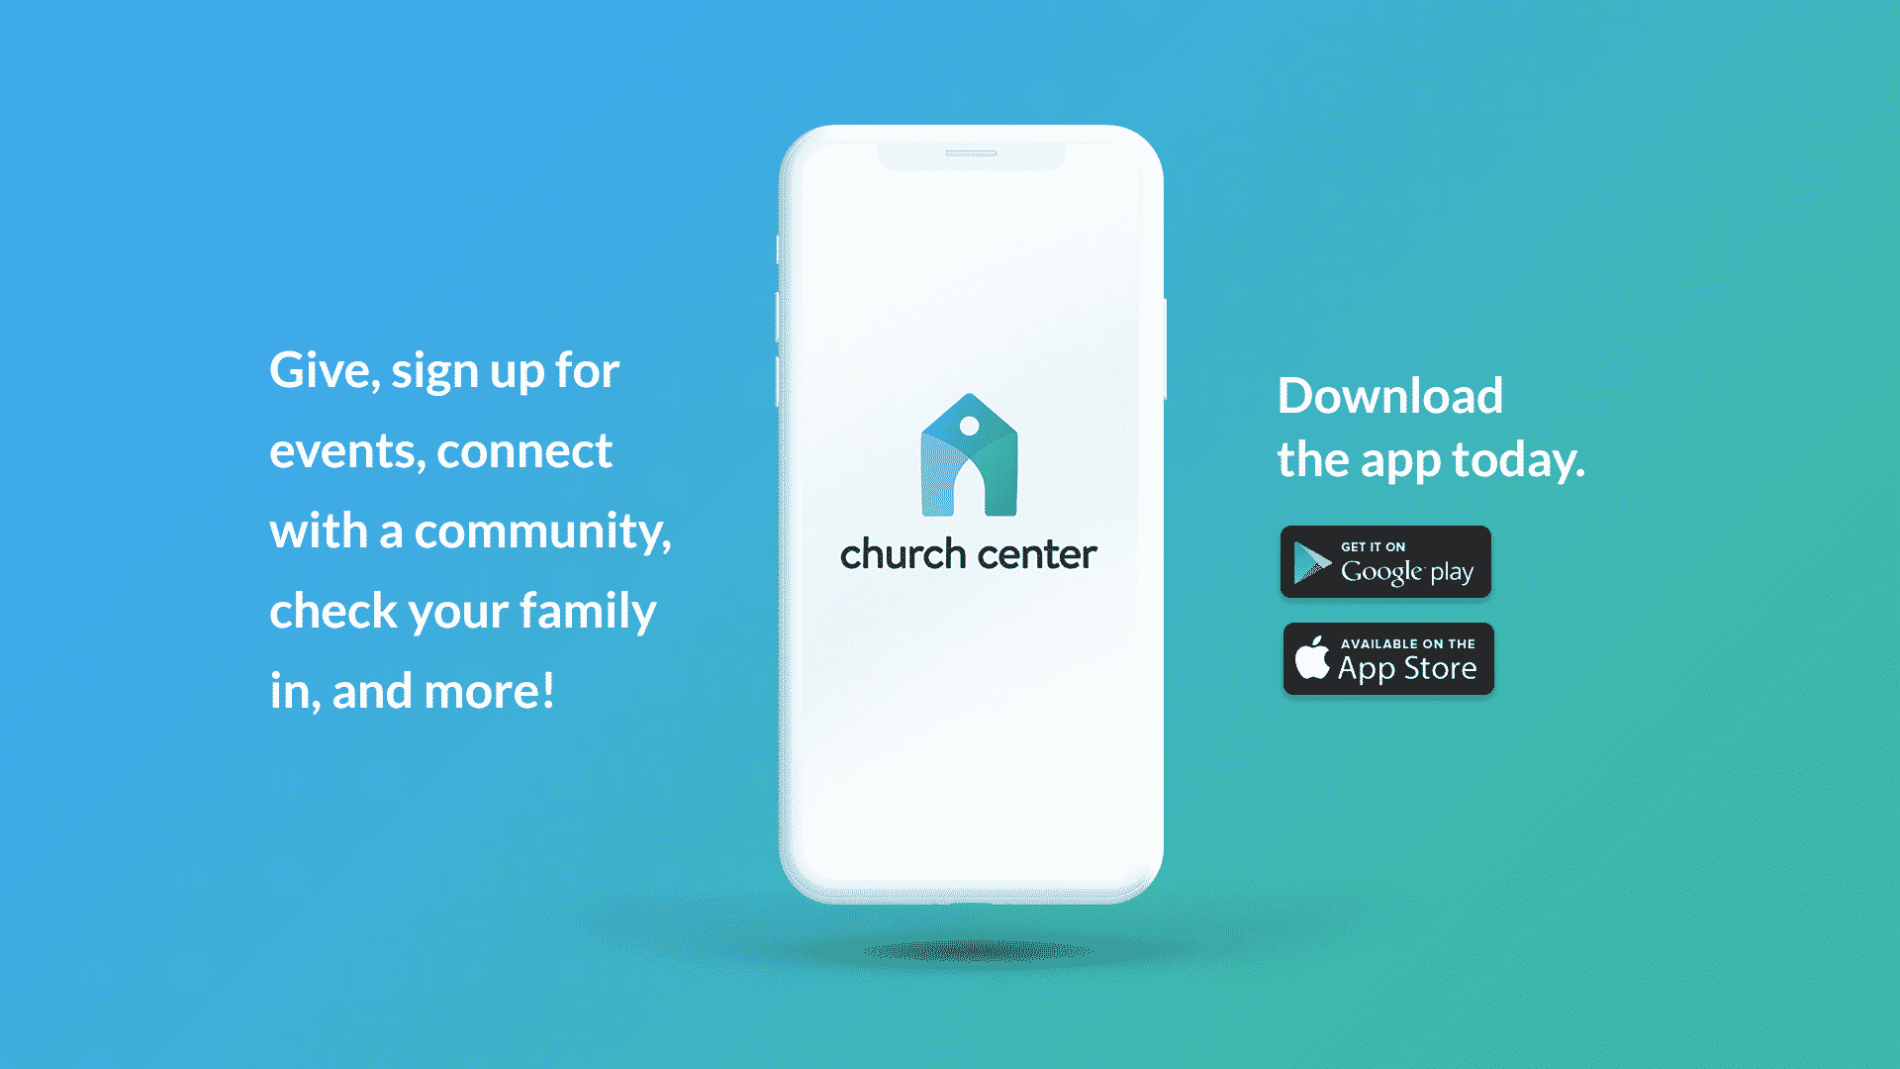 click to download the churchcenter app